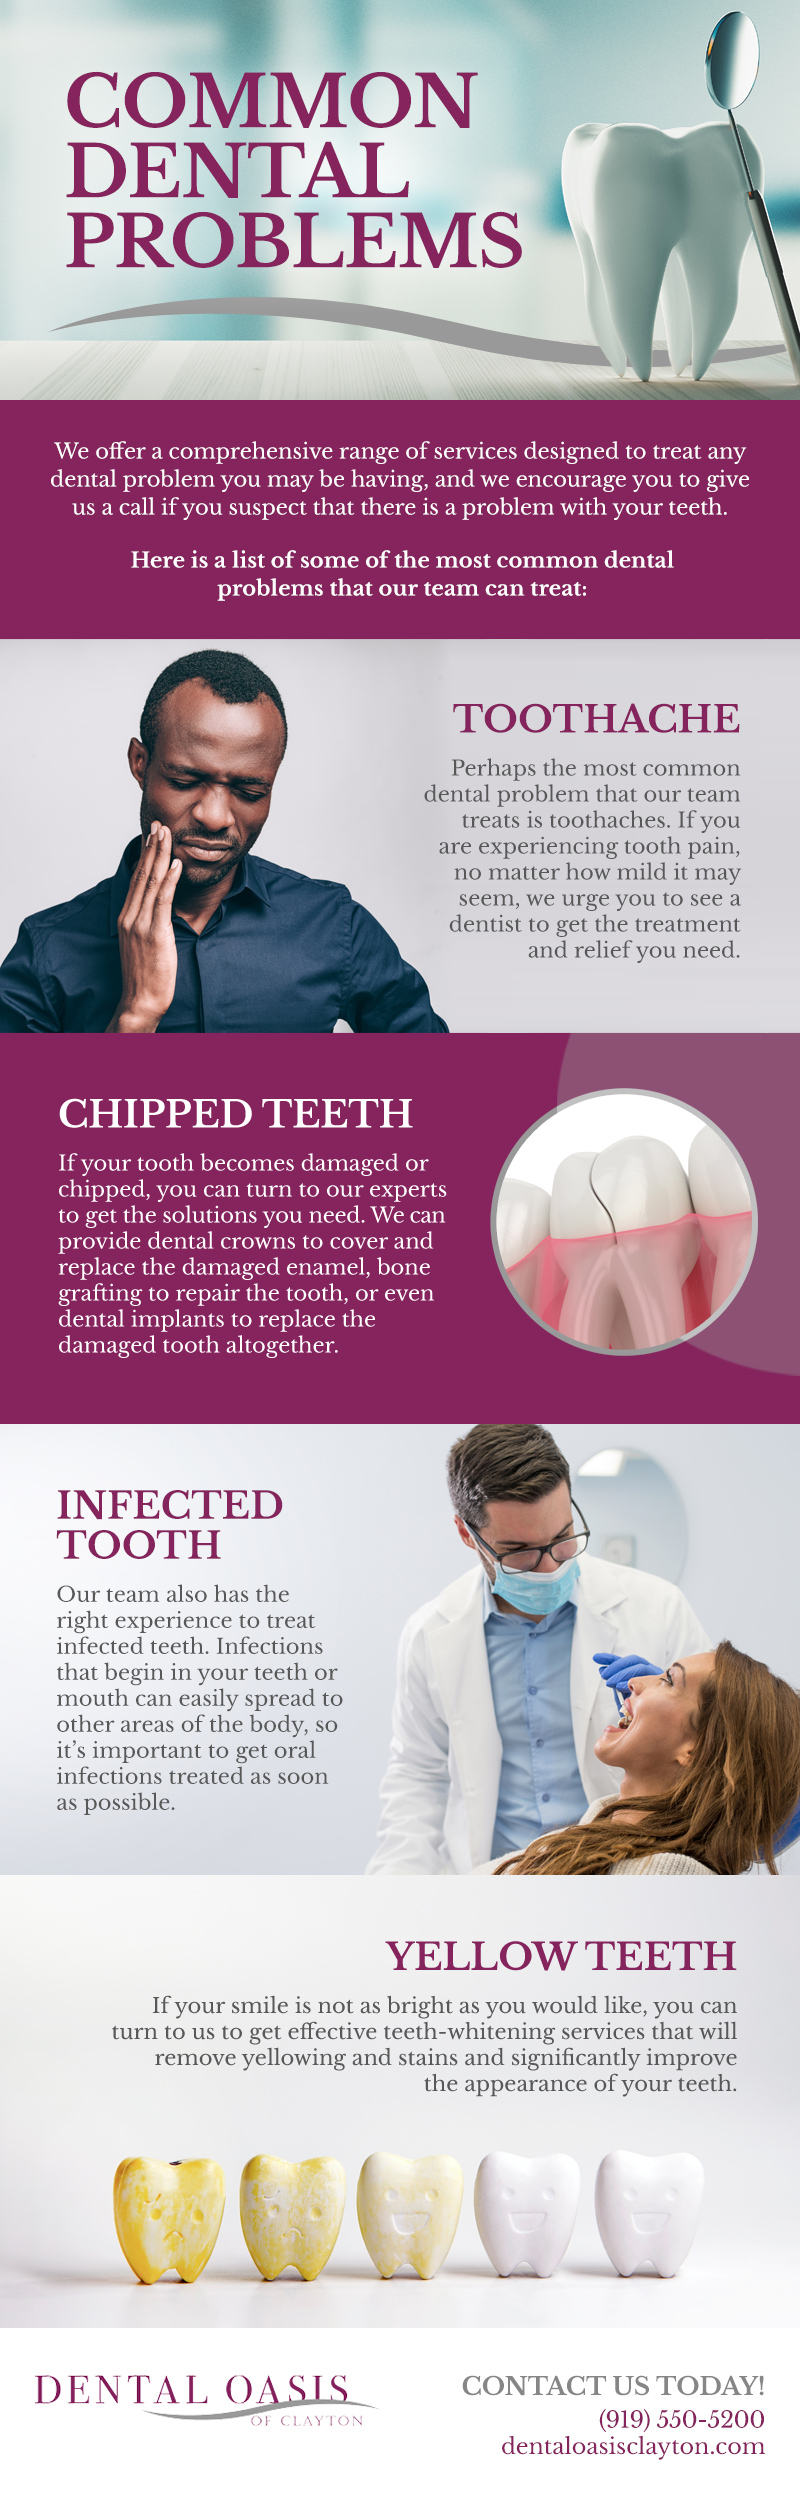 Common Dental Problems [infographic]